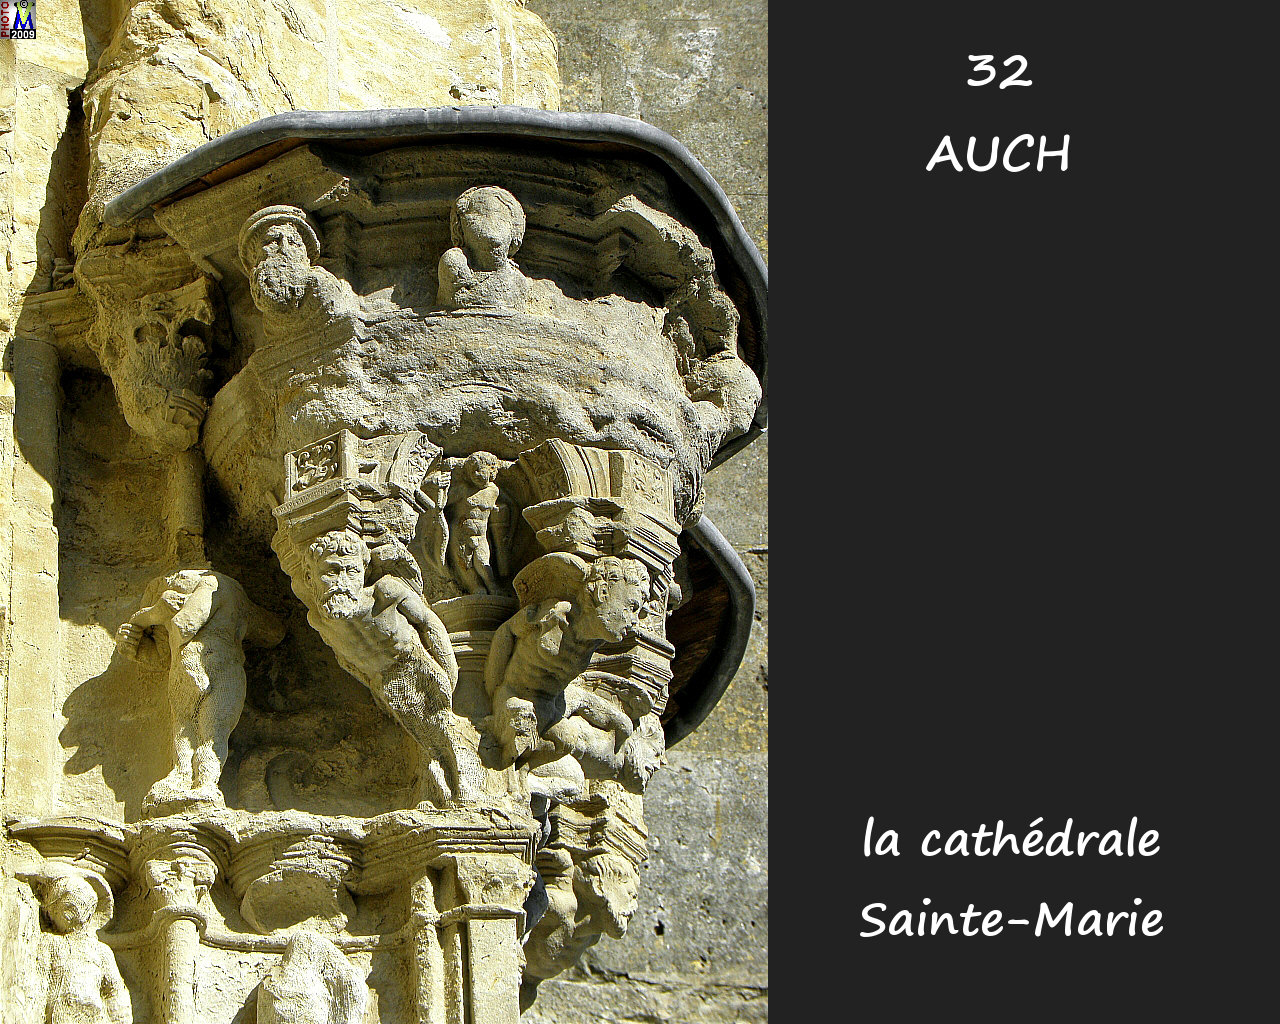 32AUCH_cathedrale_132.jpg